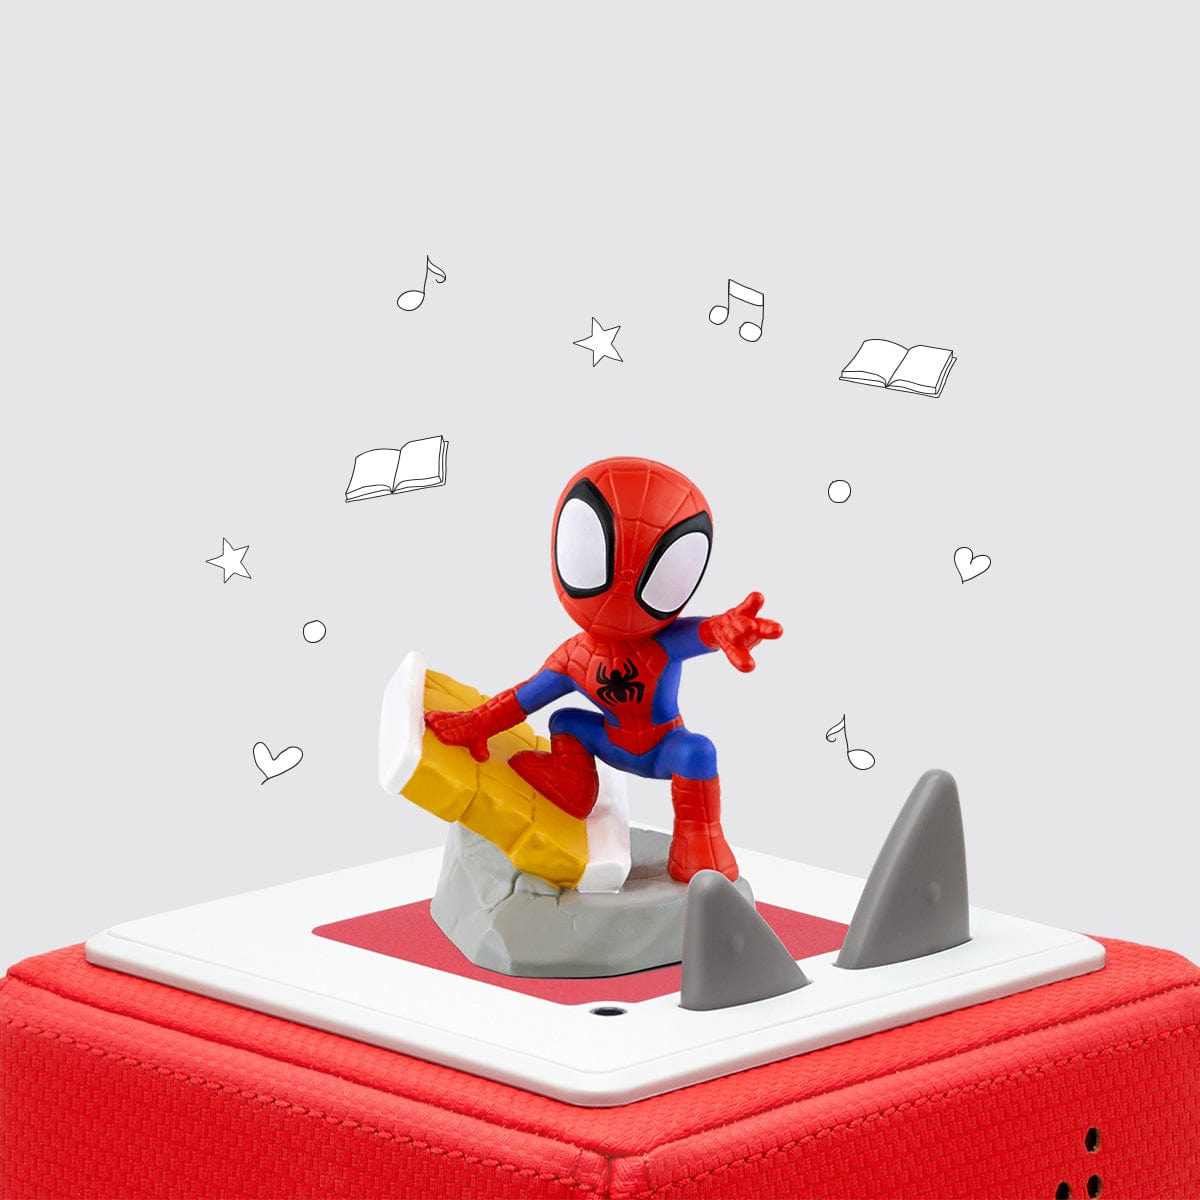 Tonies Spin Audio Play Character from Marvel Spidey and His Amazing Friends